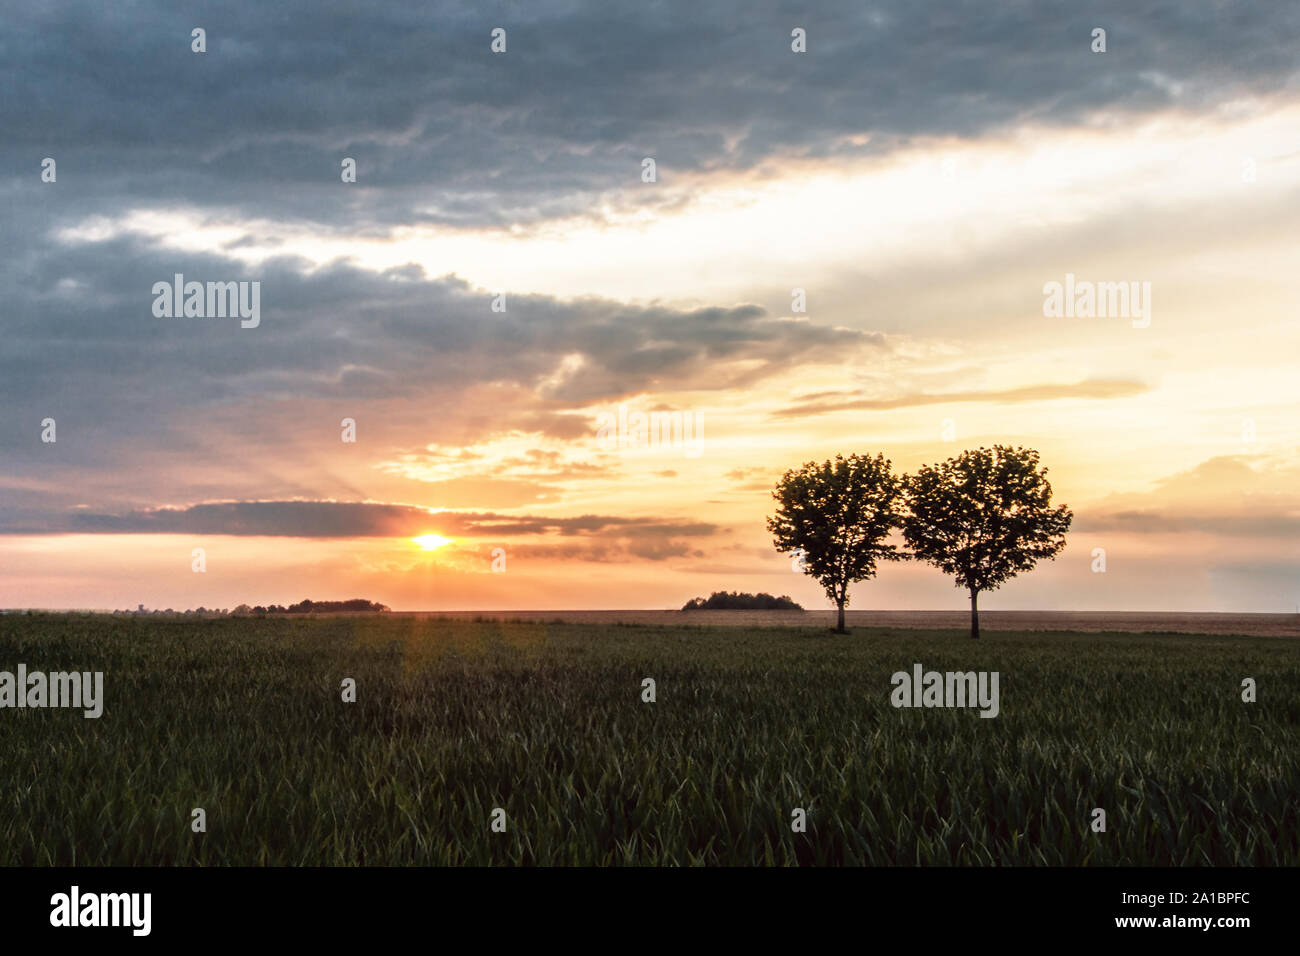 Colorful sunset with cloud formation over a field with 2 striking trees, wide view to small groups of trees - Location: Saxony, Germany Stock Photo